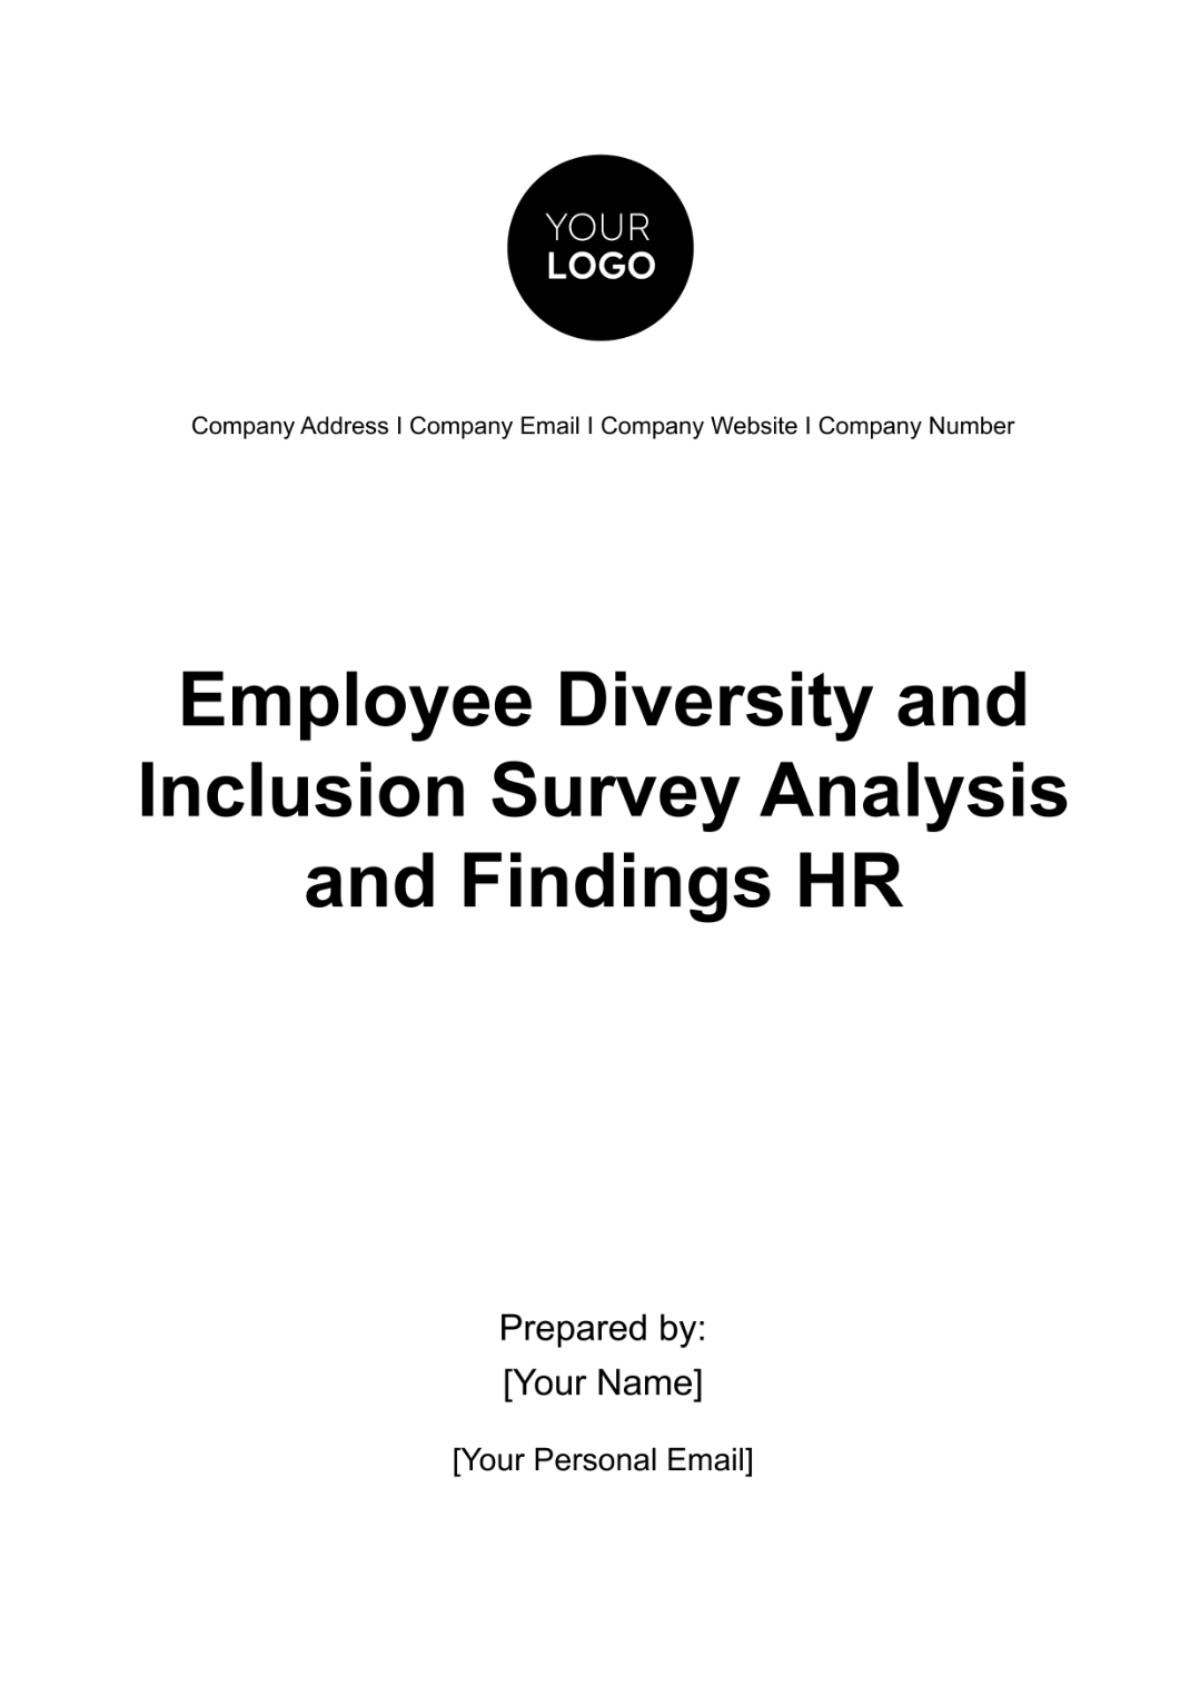 Employee Diversity and Inclusion Survey Analysis and Findings HR Template